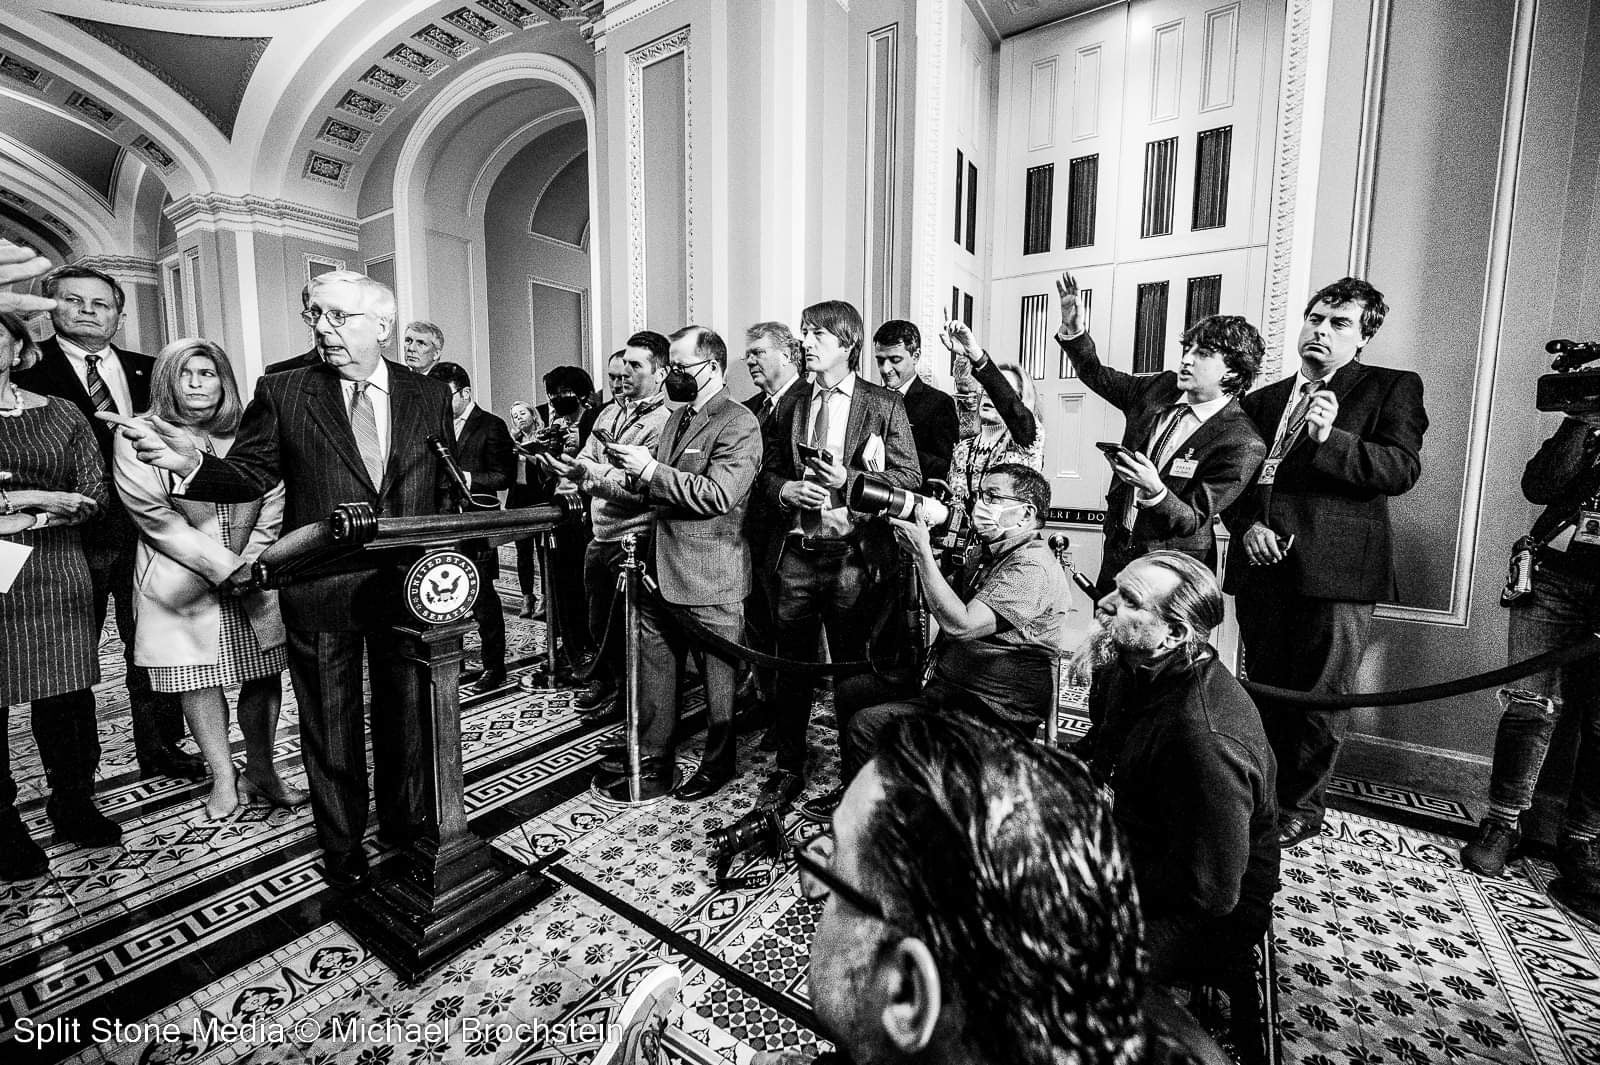 Senator Mitch McConnel answers questions from many reporters during a press conference in a black and white photograph.